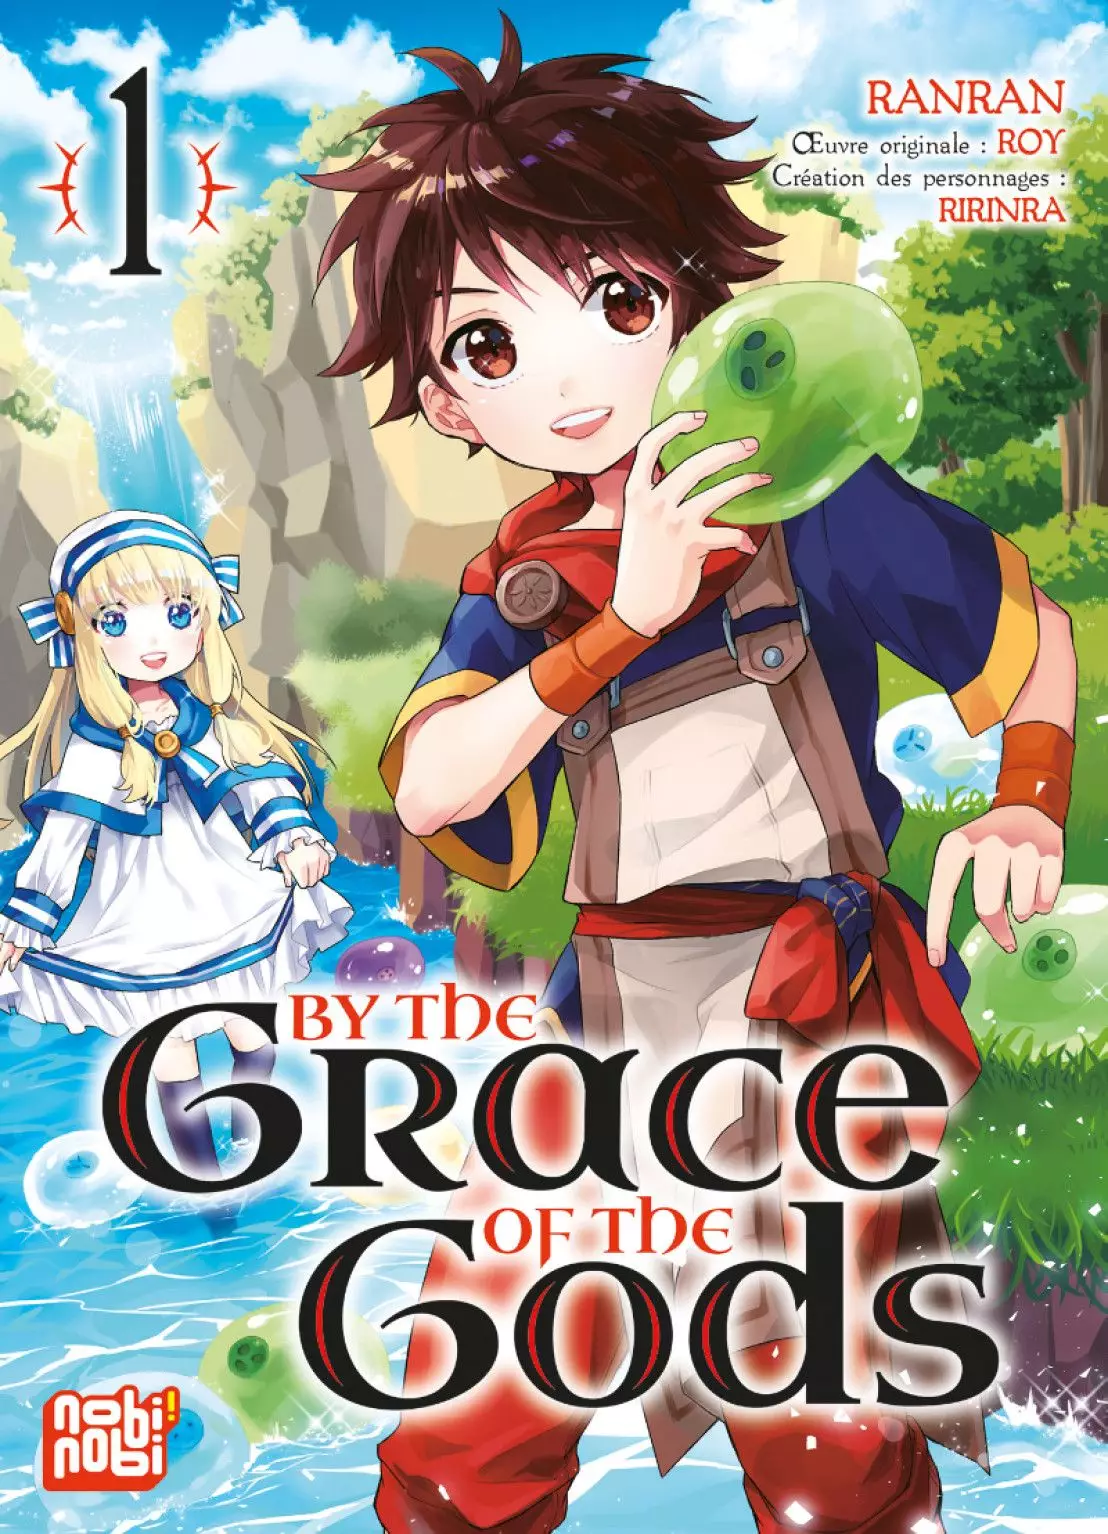 Manga - By the grace of the gods